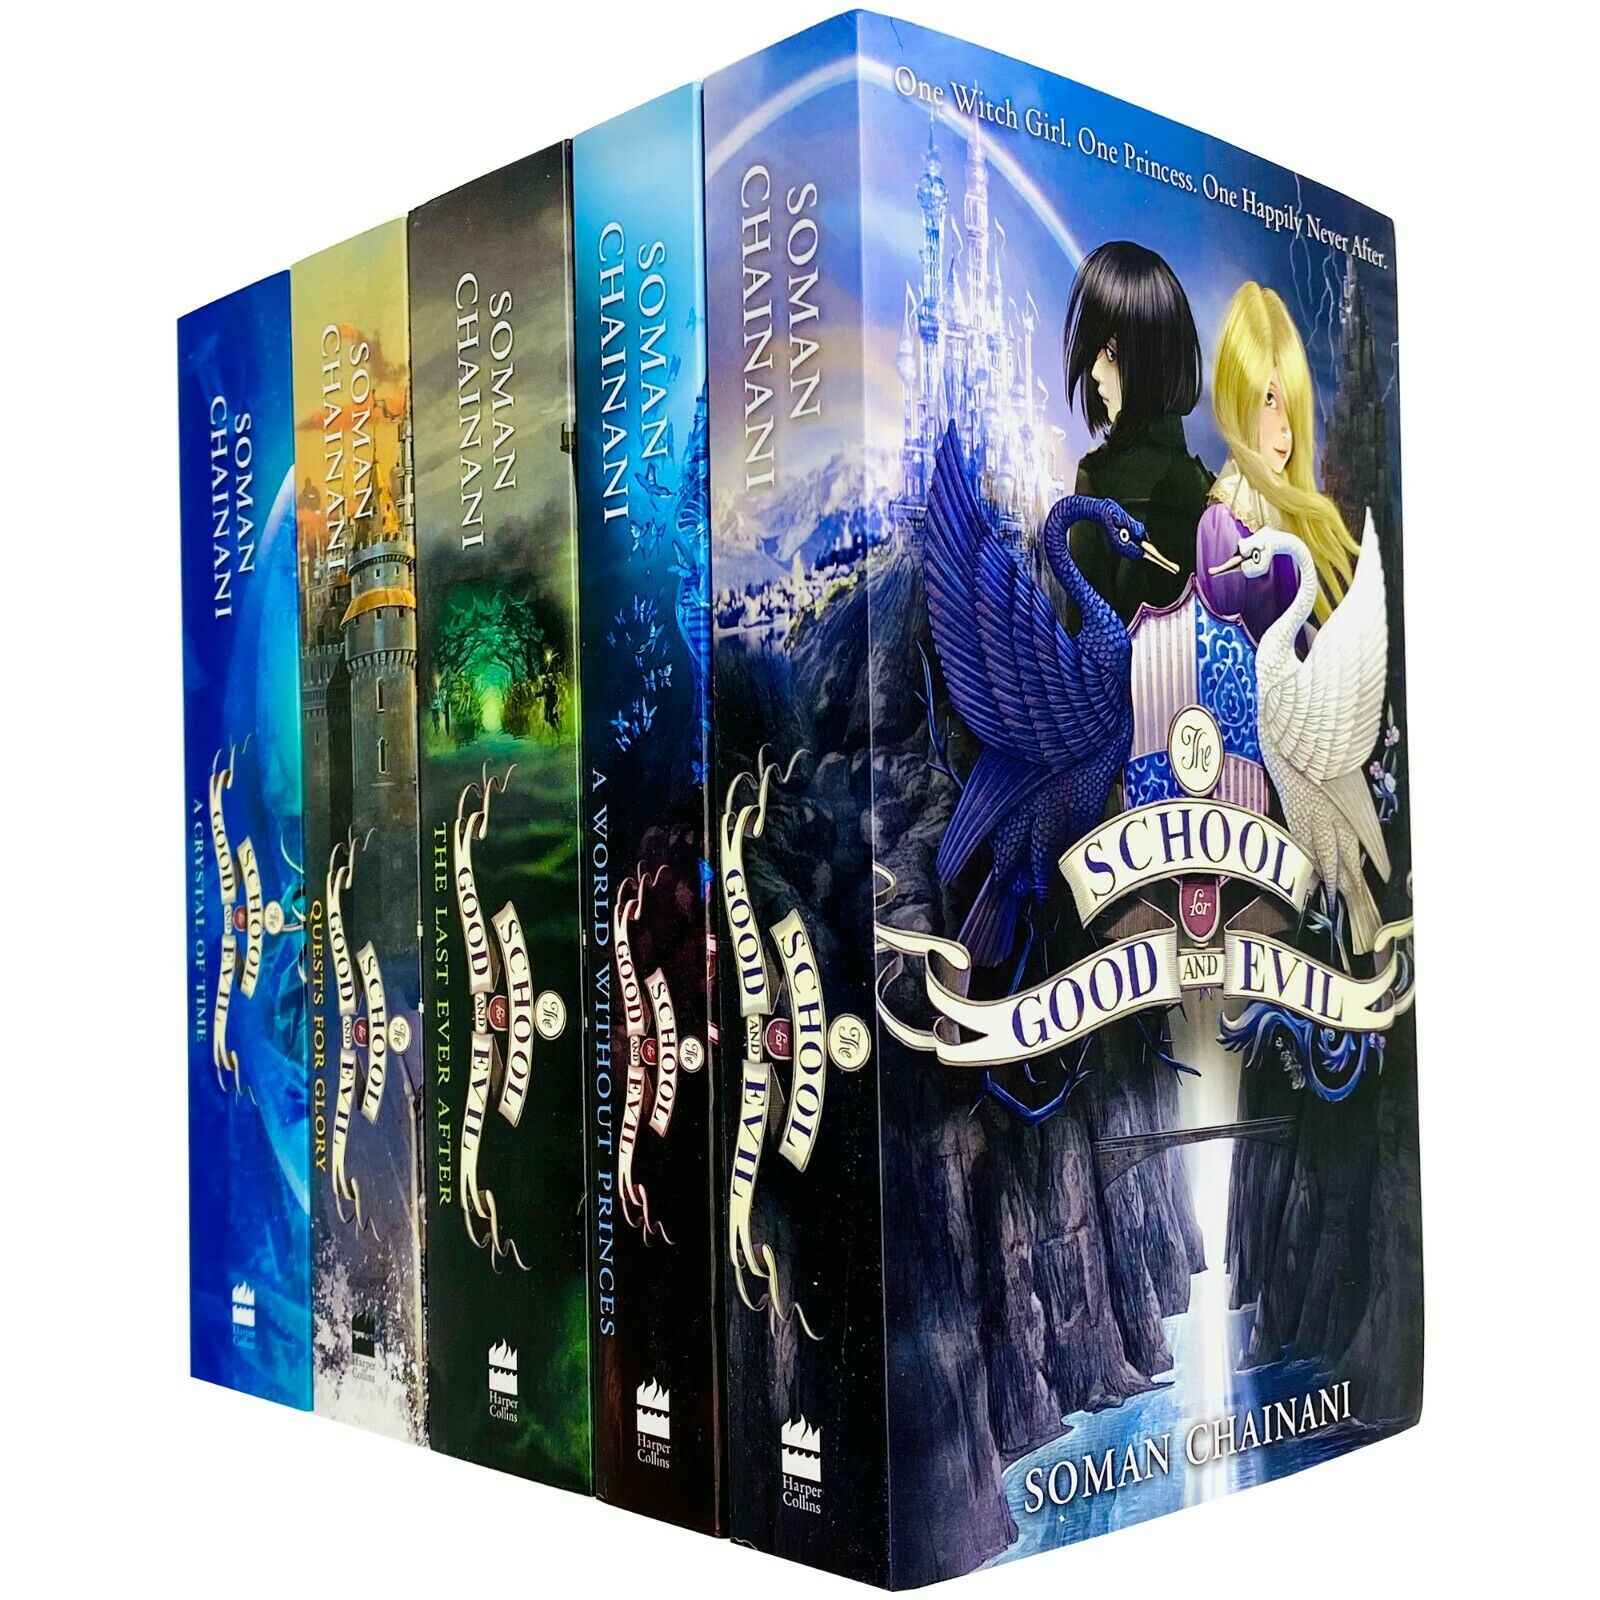 School For Good & Evil 5 Books Young Adult Collection Pack Paperback By Soman Chainani - St Stephens Books